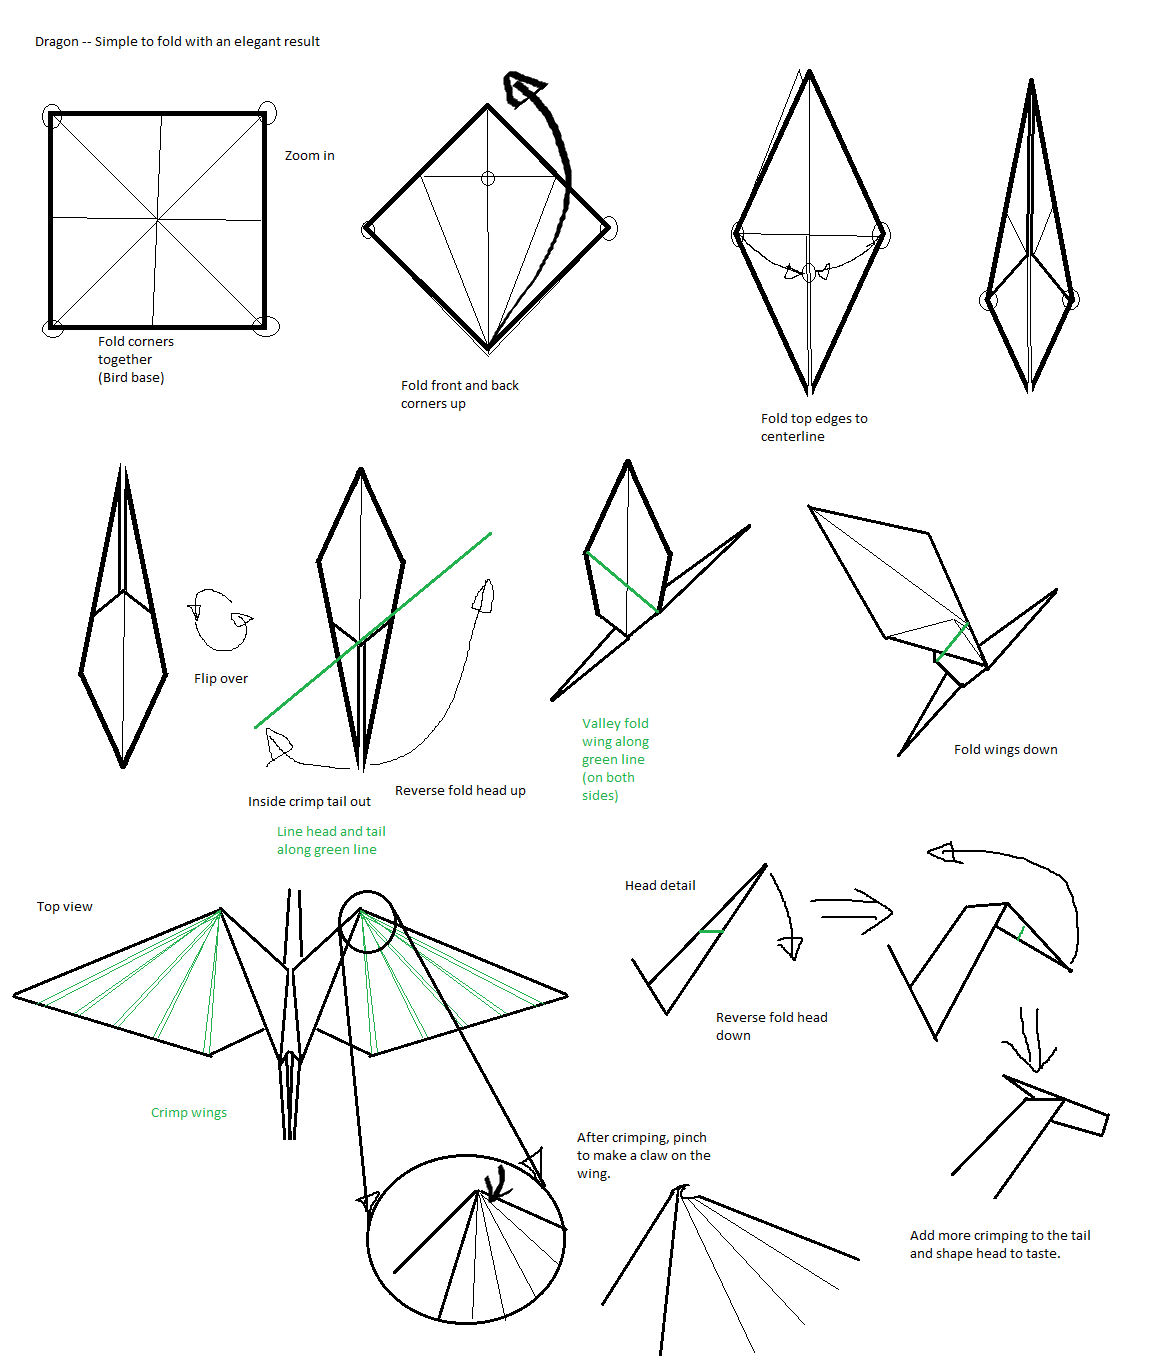 How To Fold A Origami Dragon Heres A Quick And Easy Dragon Design I Didnt See Diagrams For It